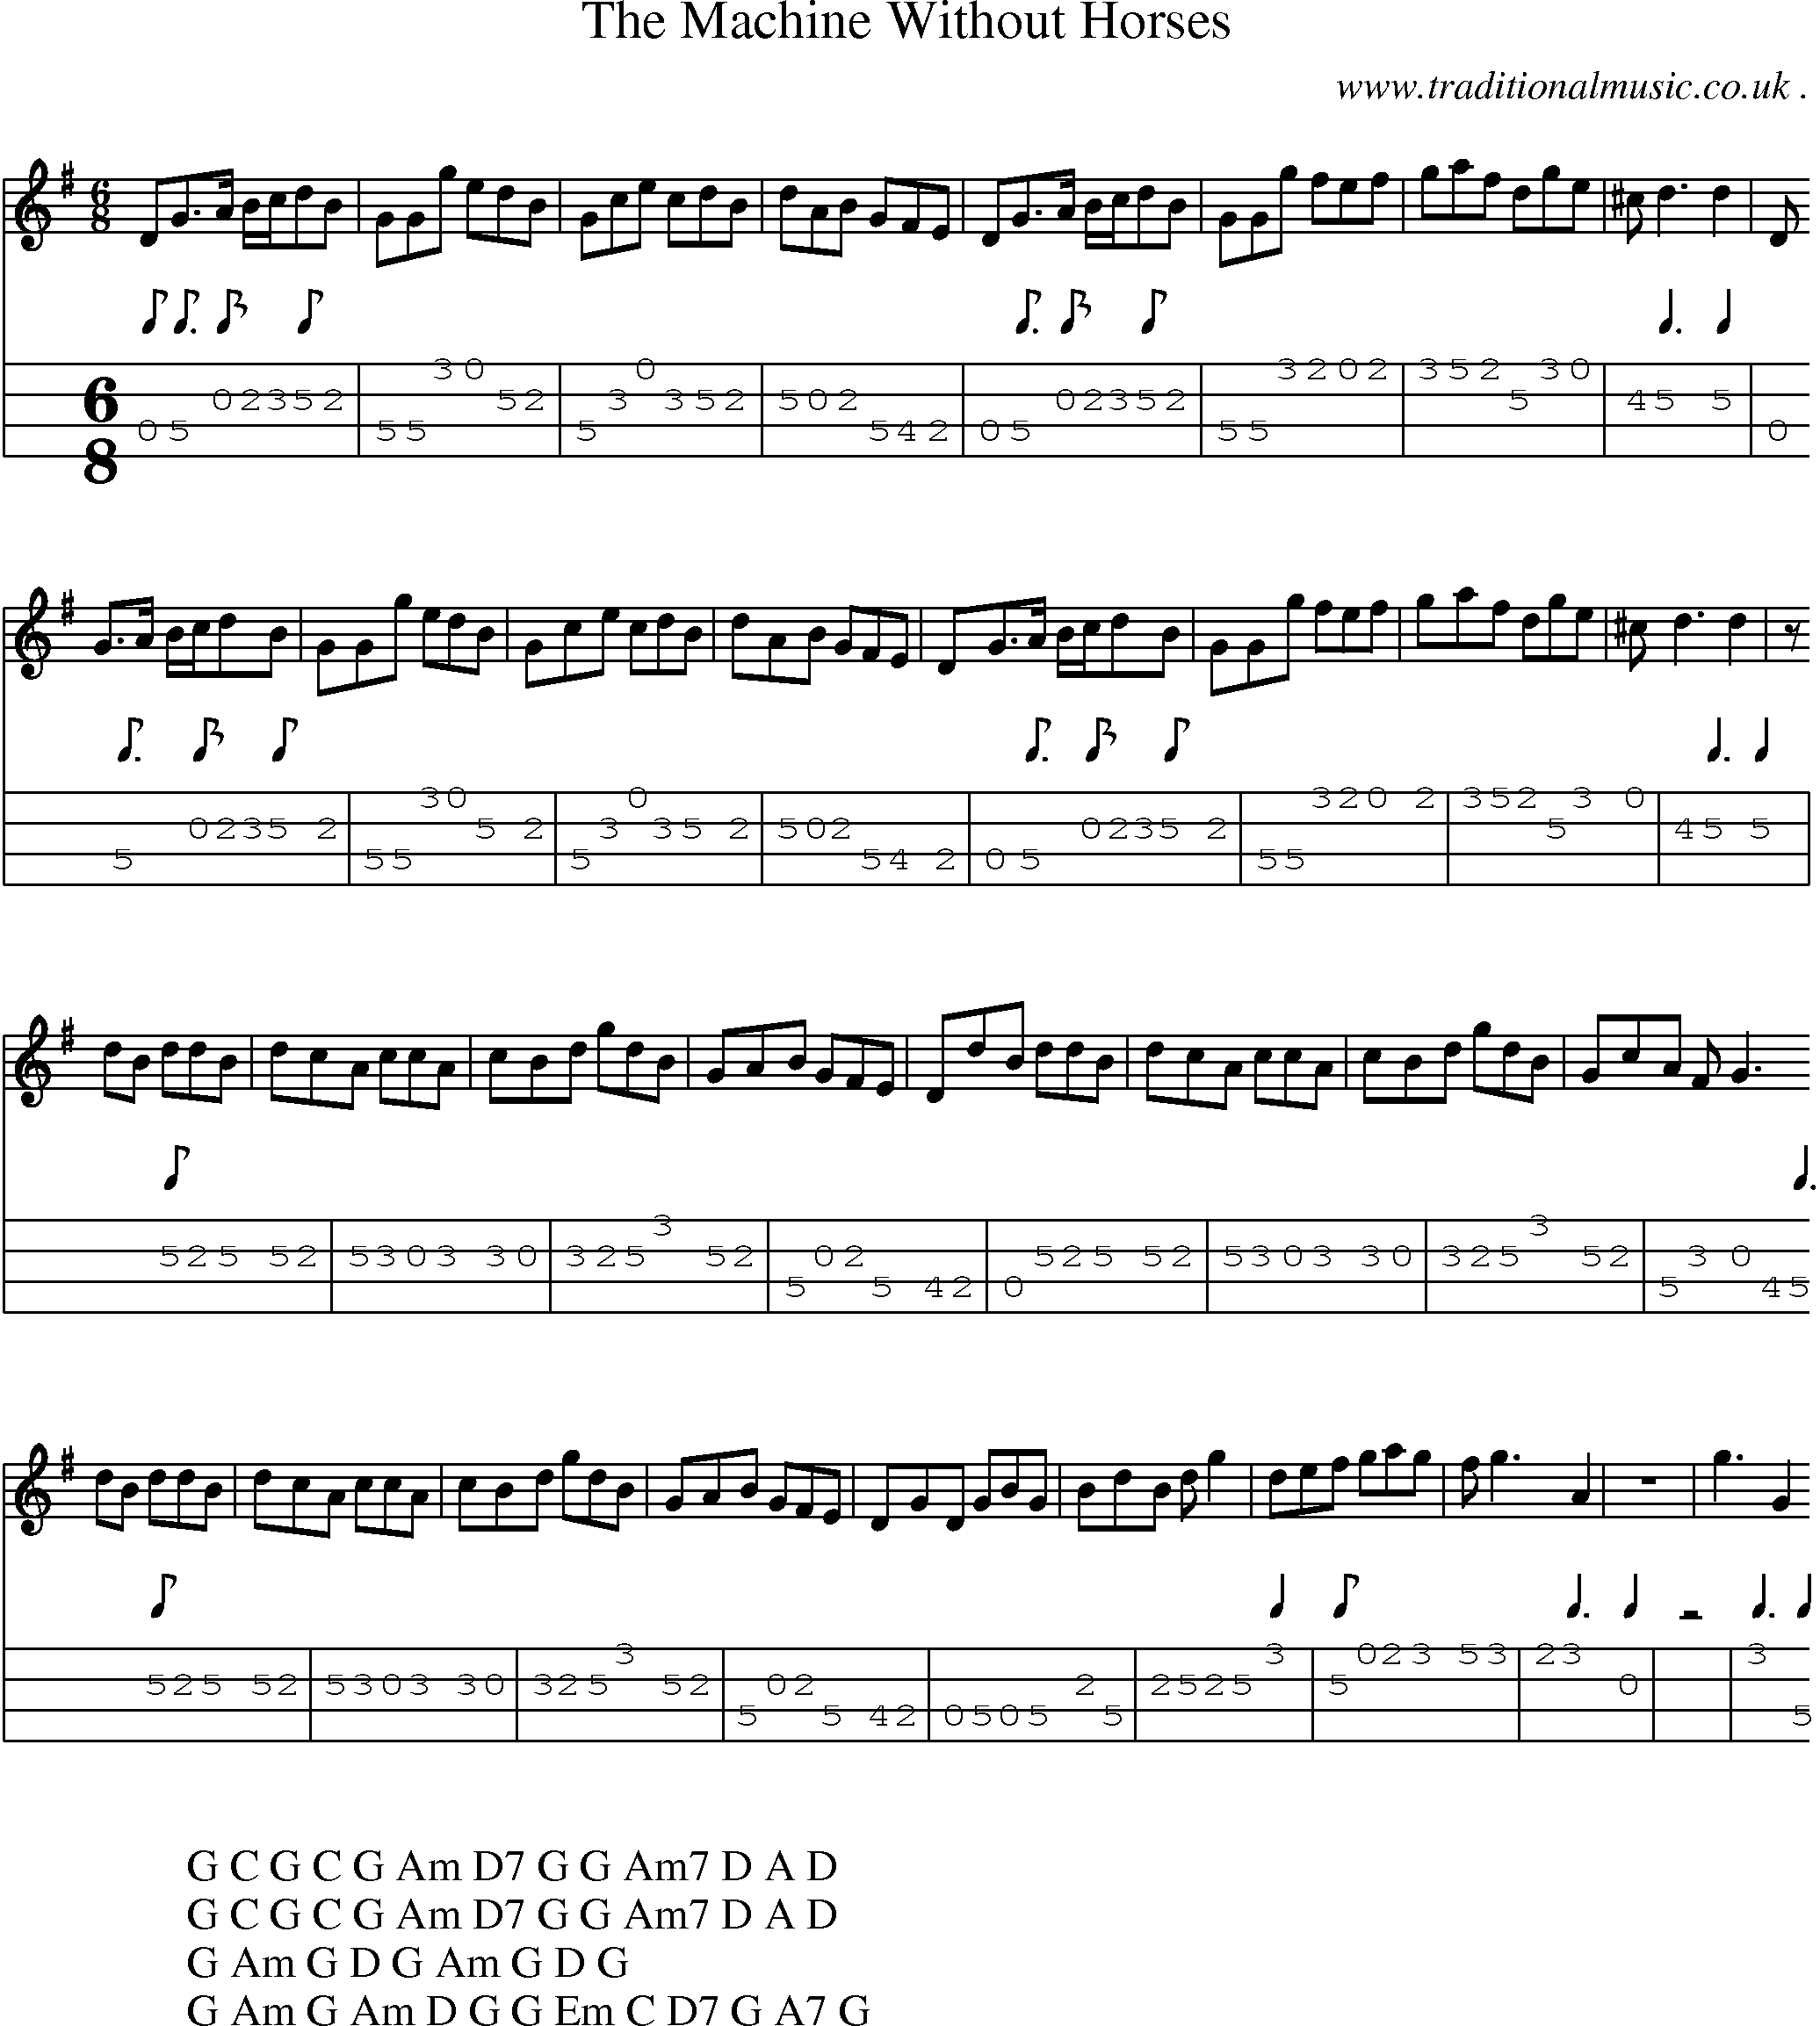 Sheet-Music and Mandolin Tabs for The Machine Without Horses